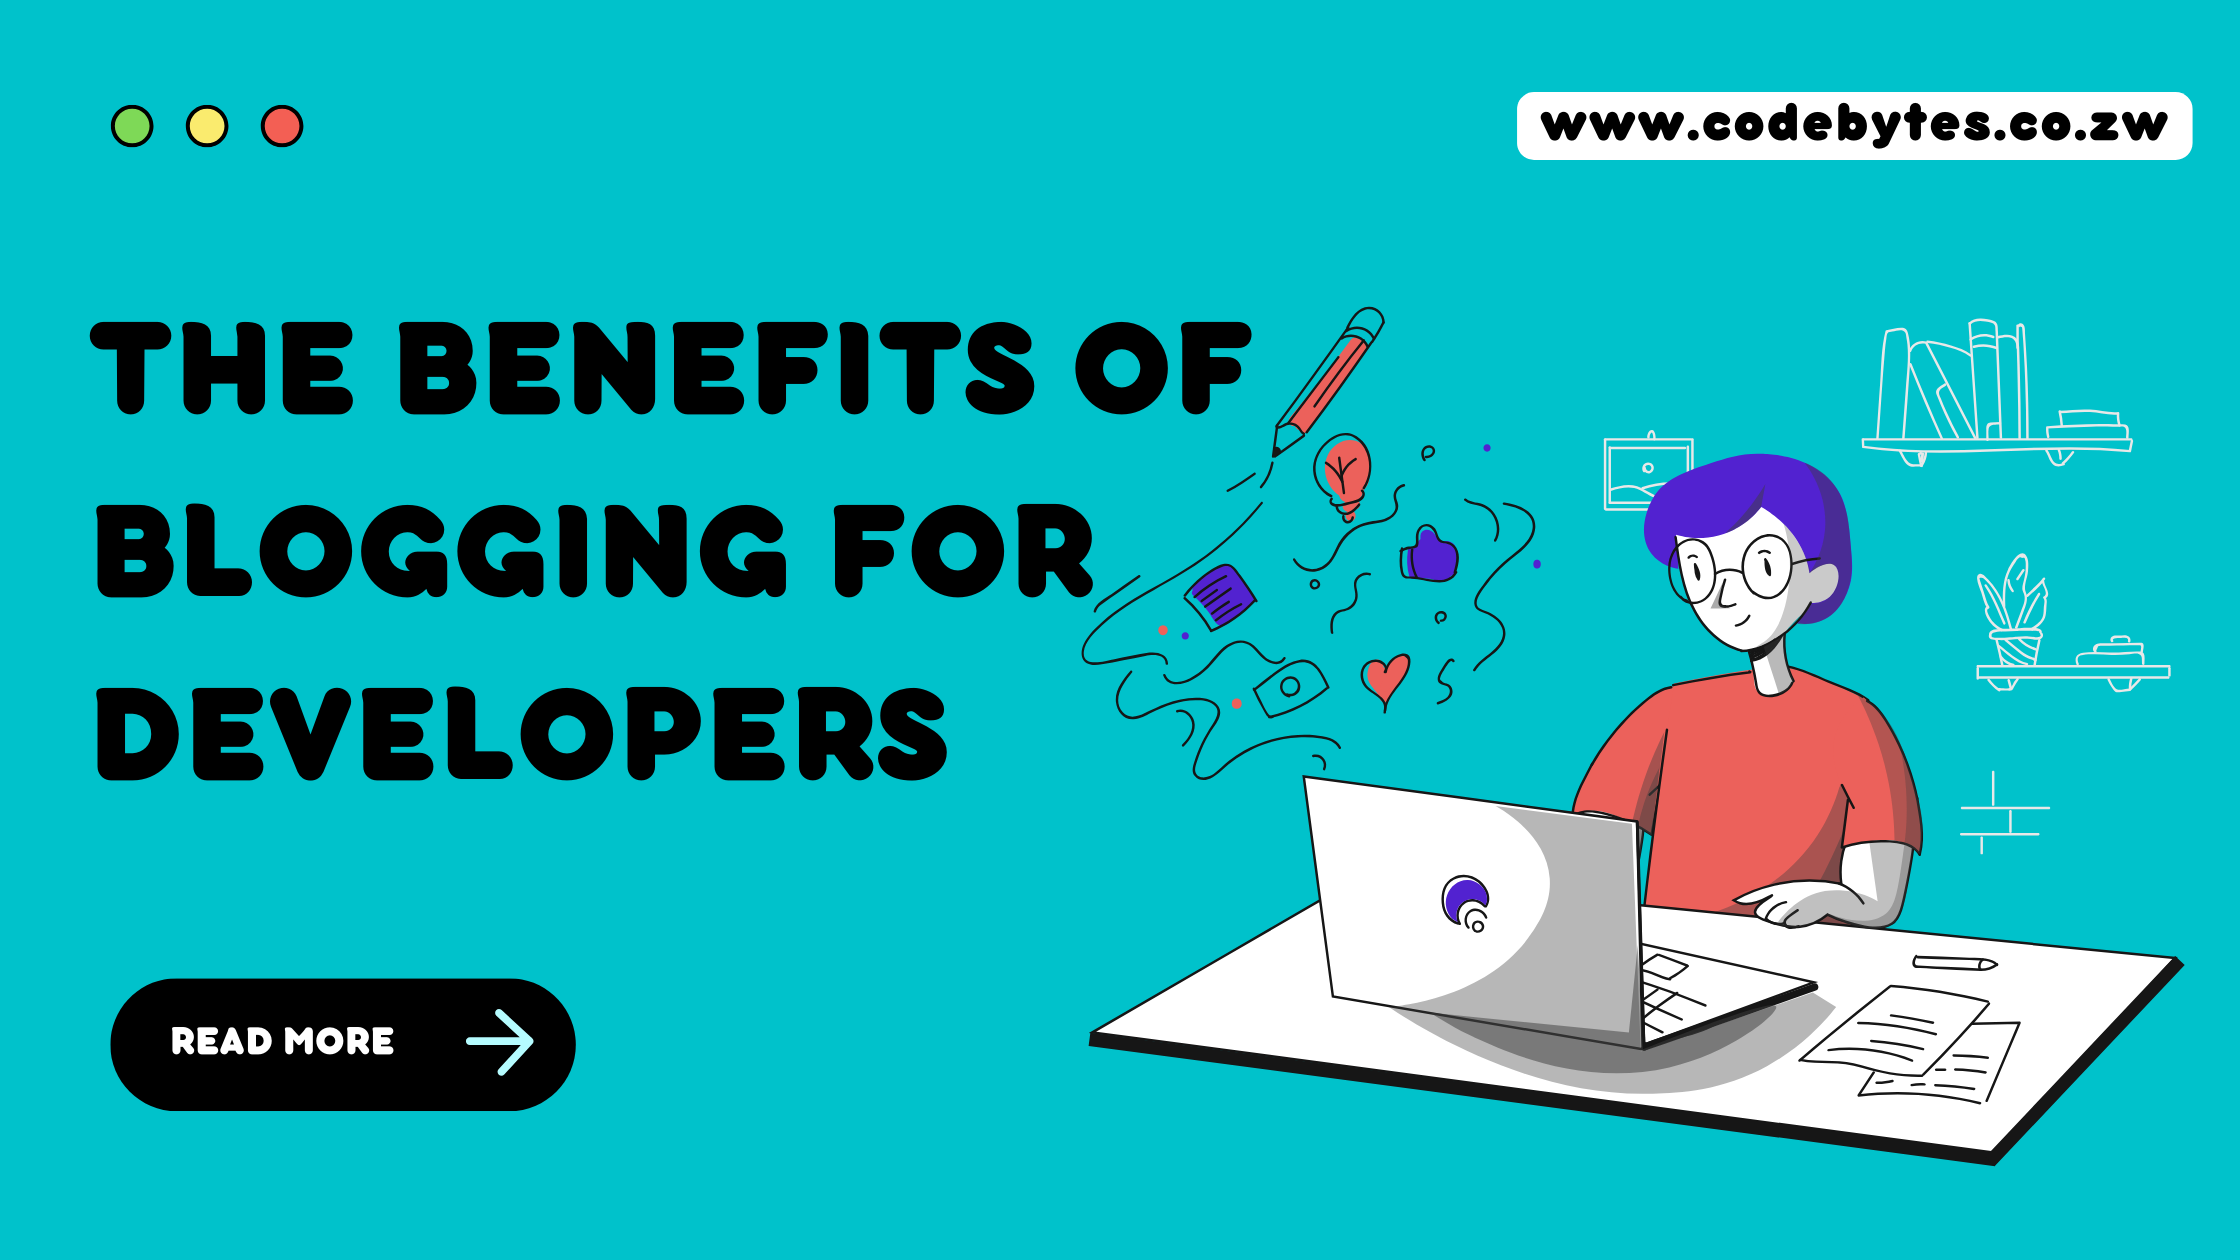 The benefits of blogging for developers